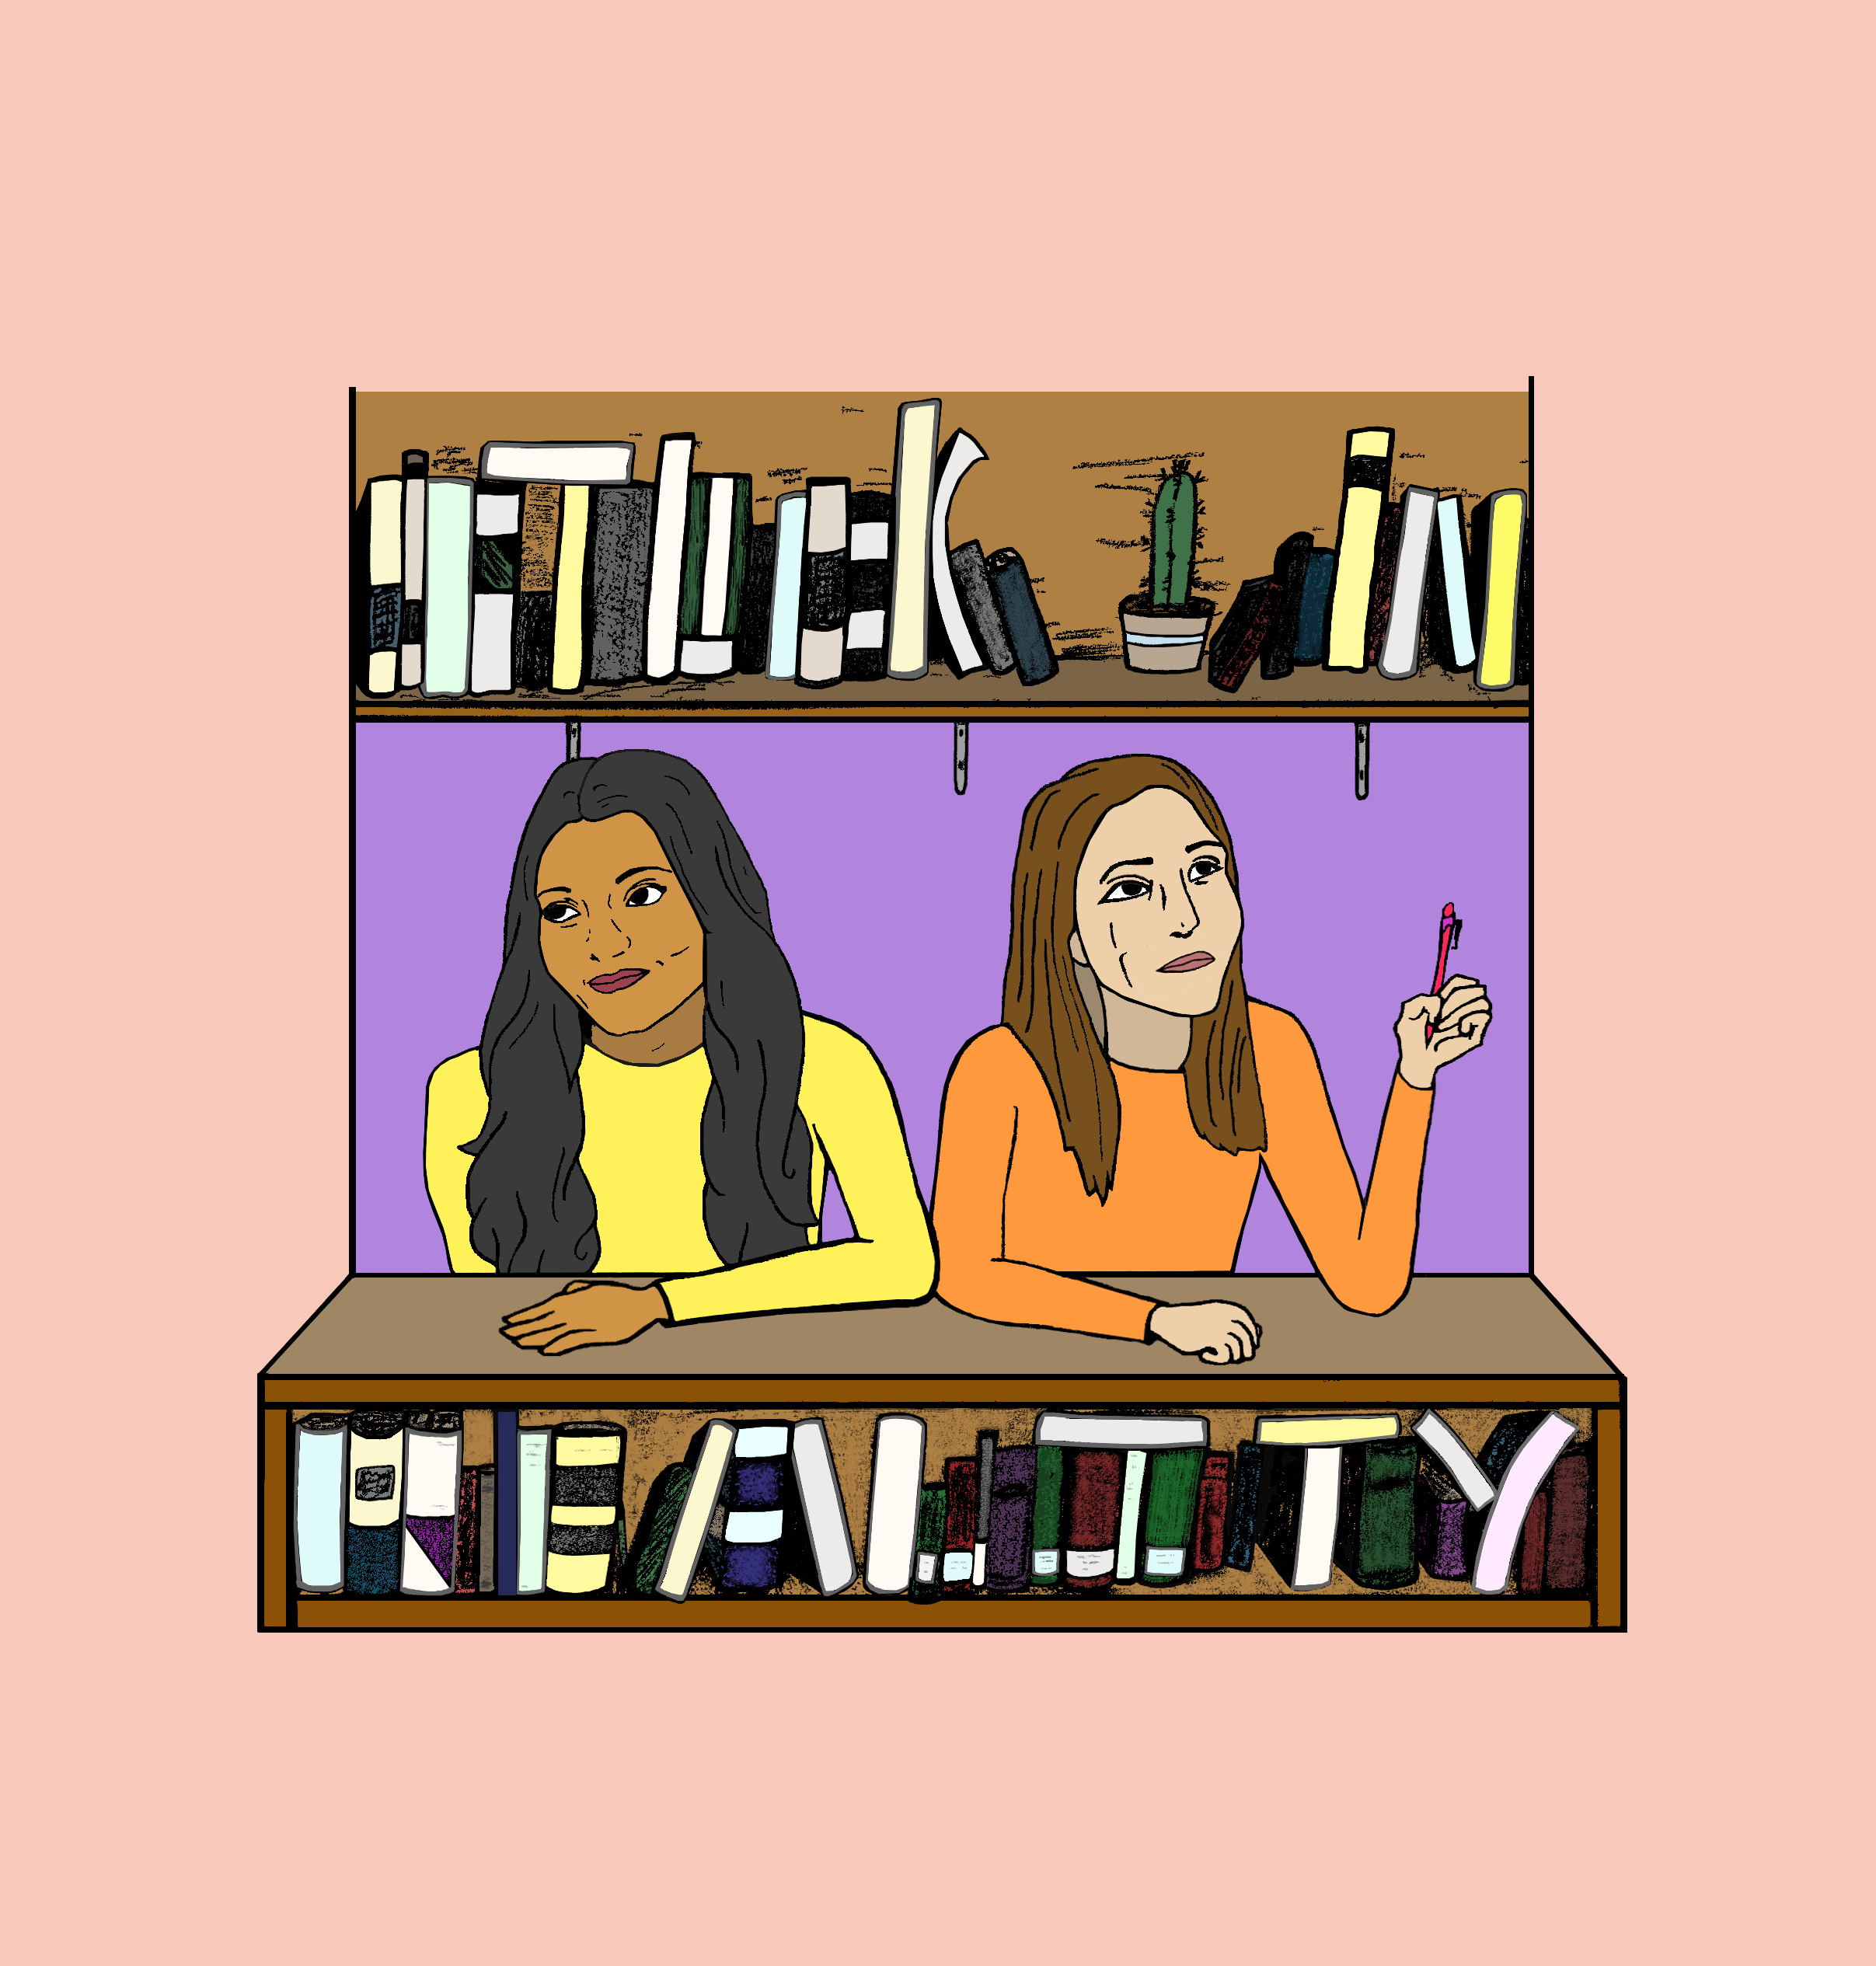 Stuck in Reality (2020)